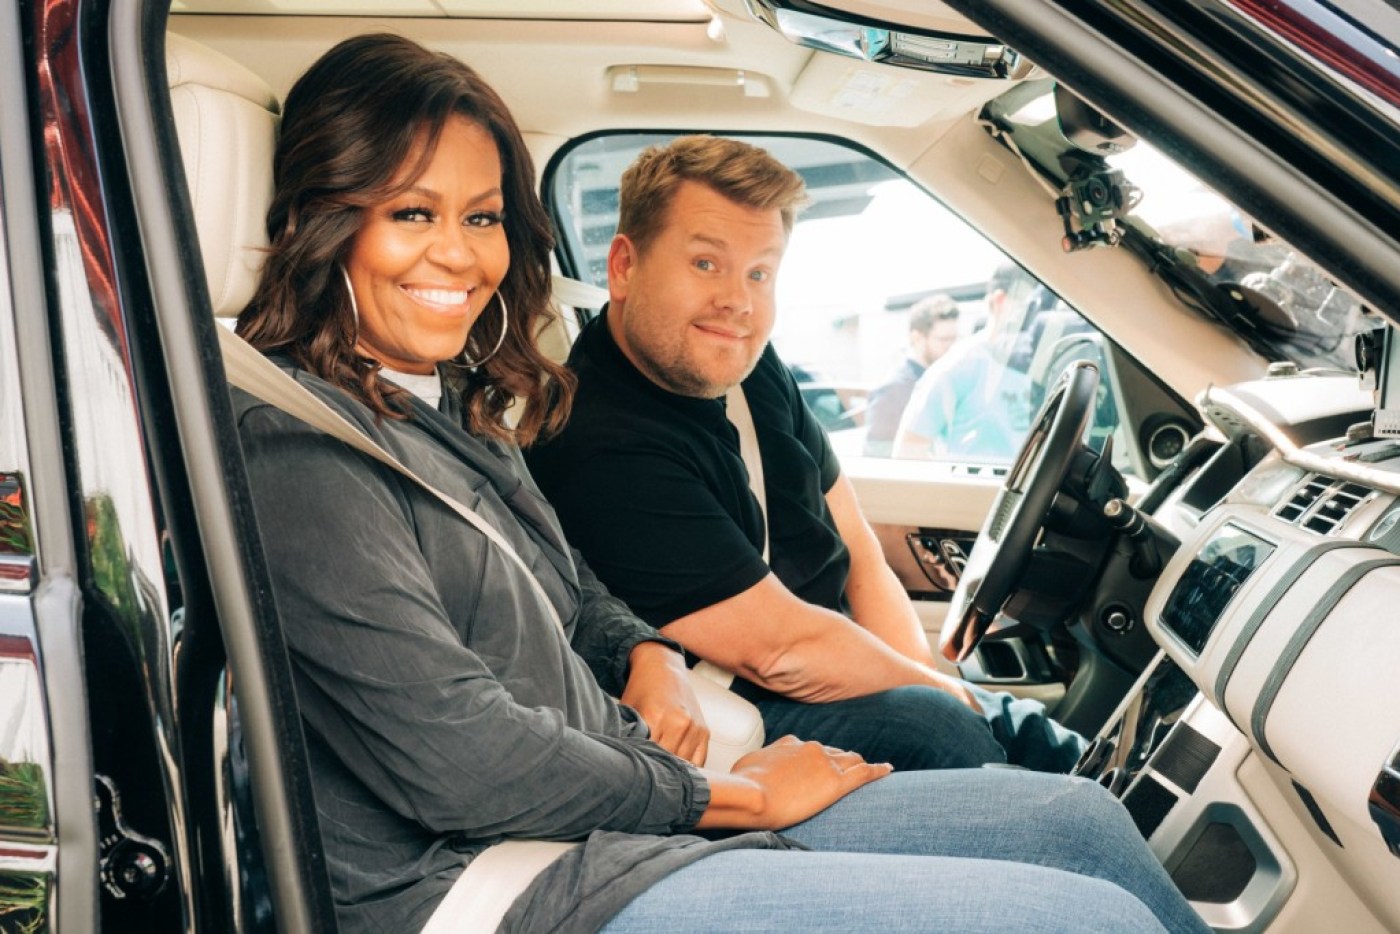 Former First Lady Michelle Obama Leads Team USA against James Corden's.